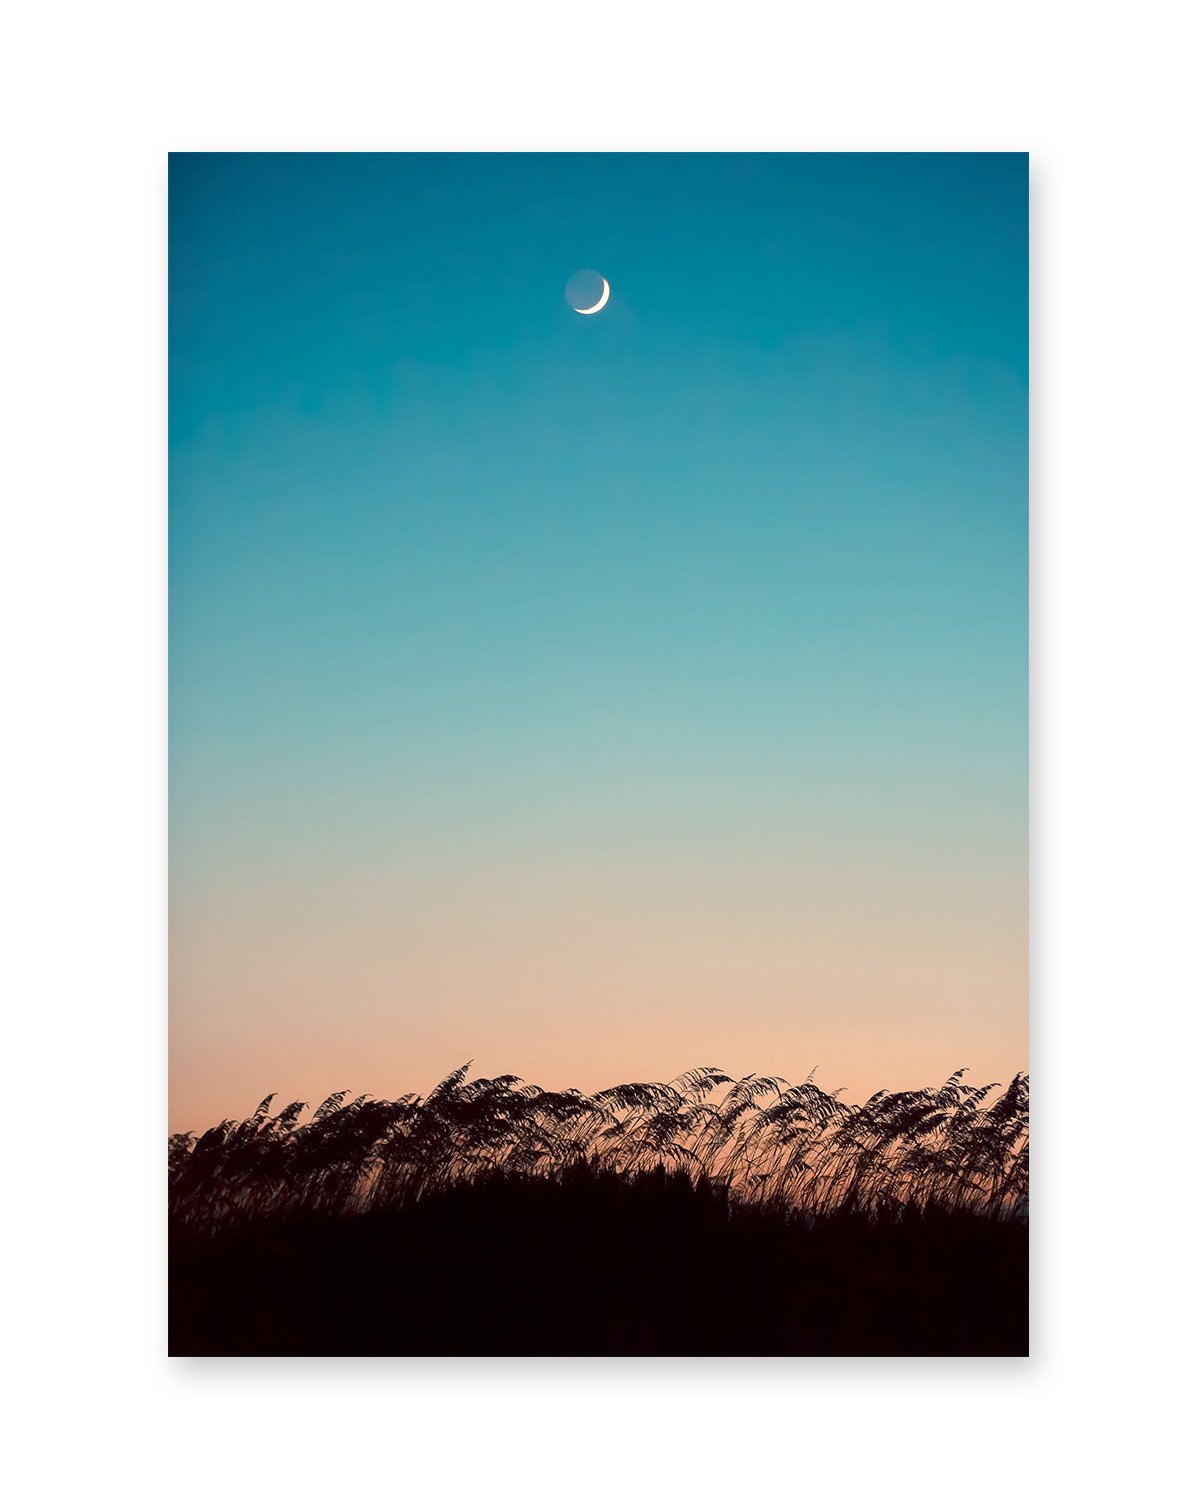 Teal Sunset Beach Photograph with moon, by Wright and Roam